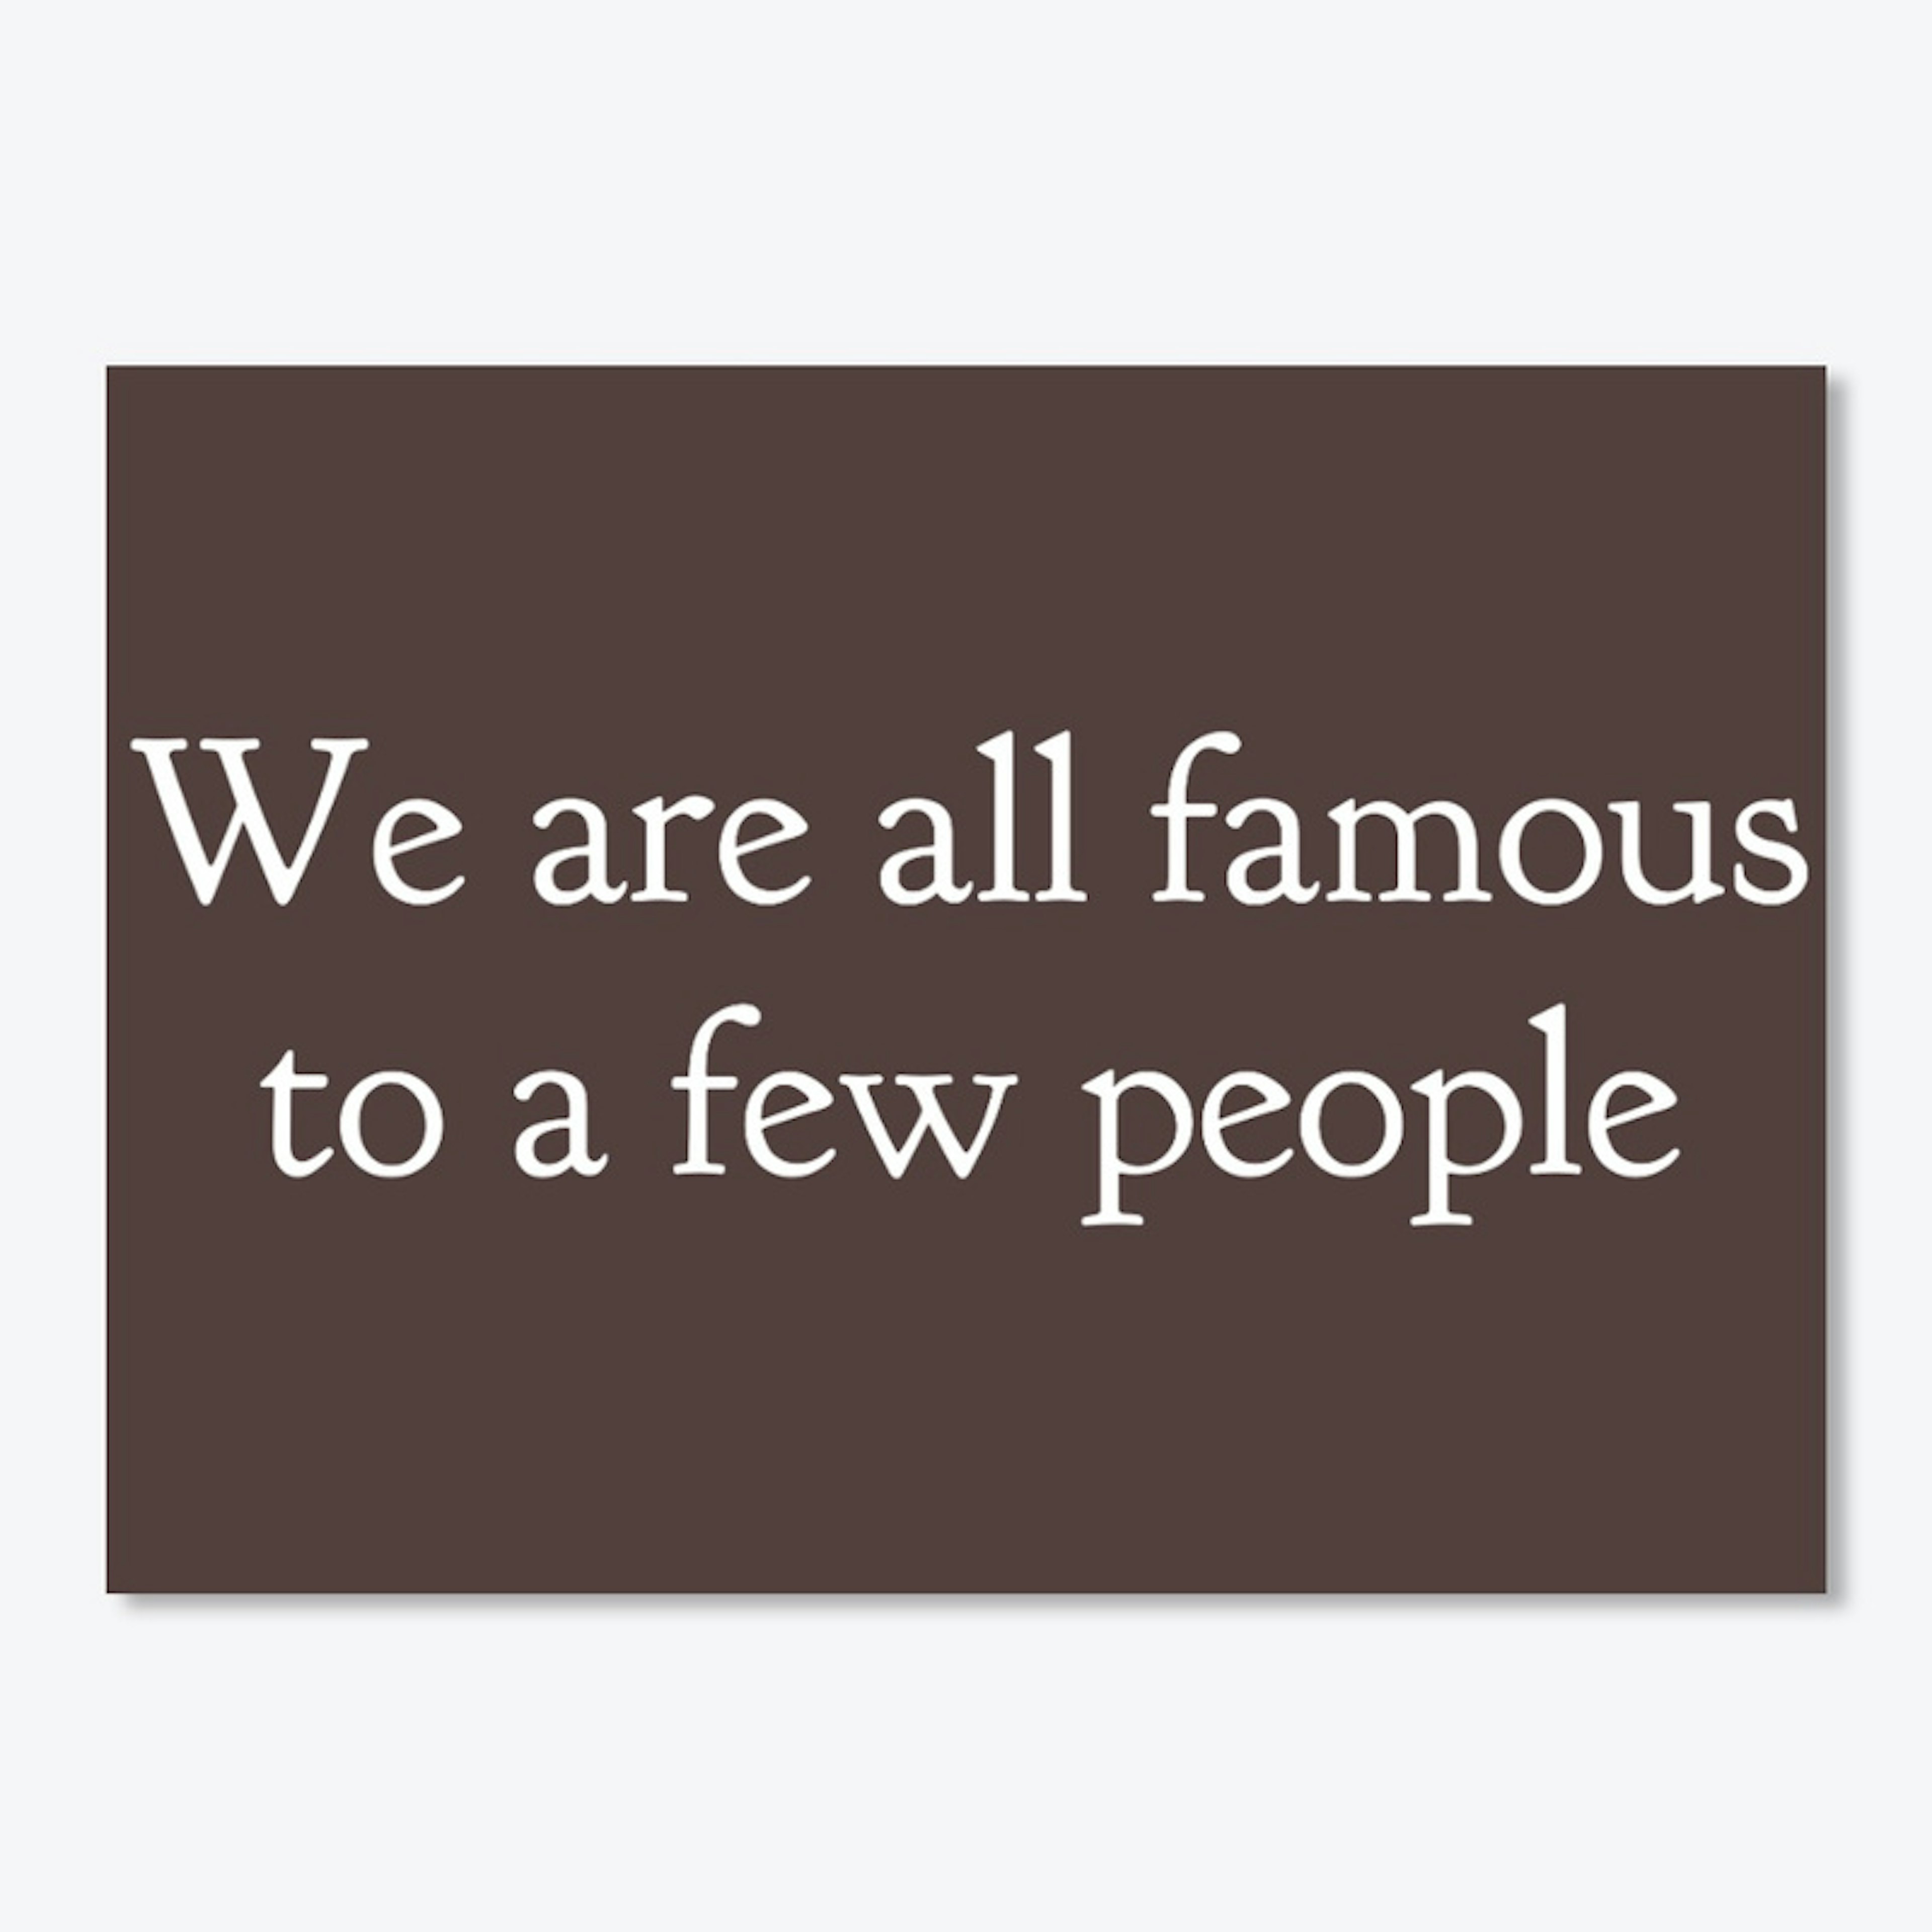 We are all famous to a few people 